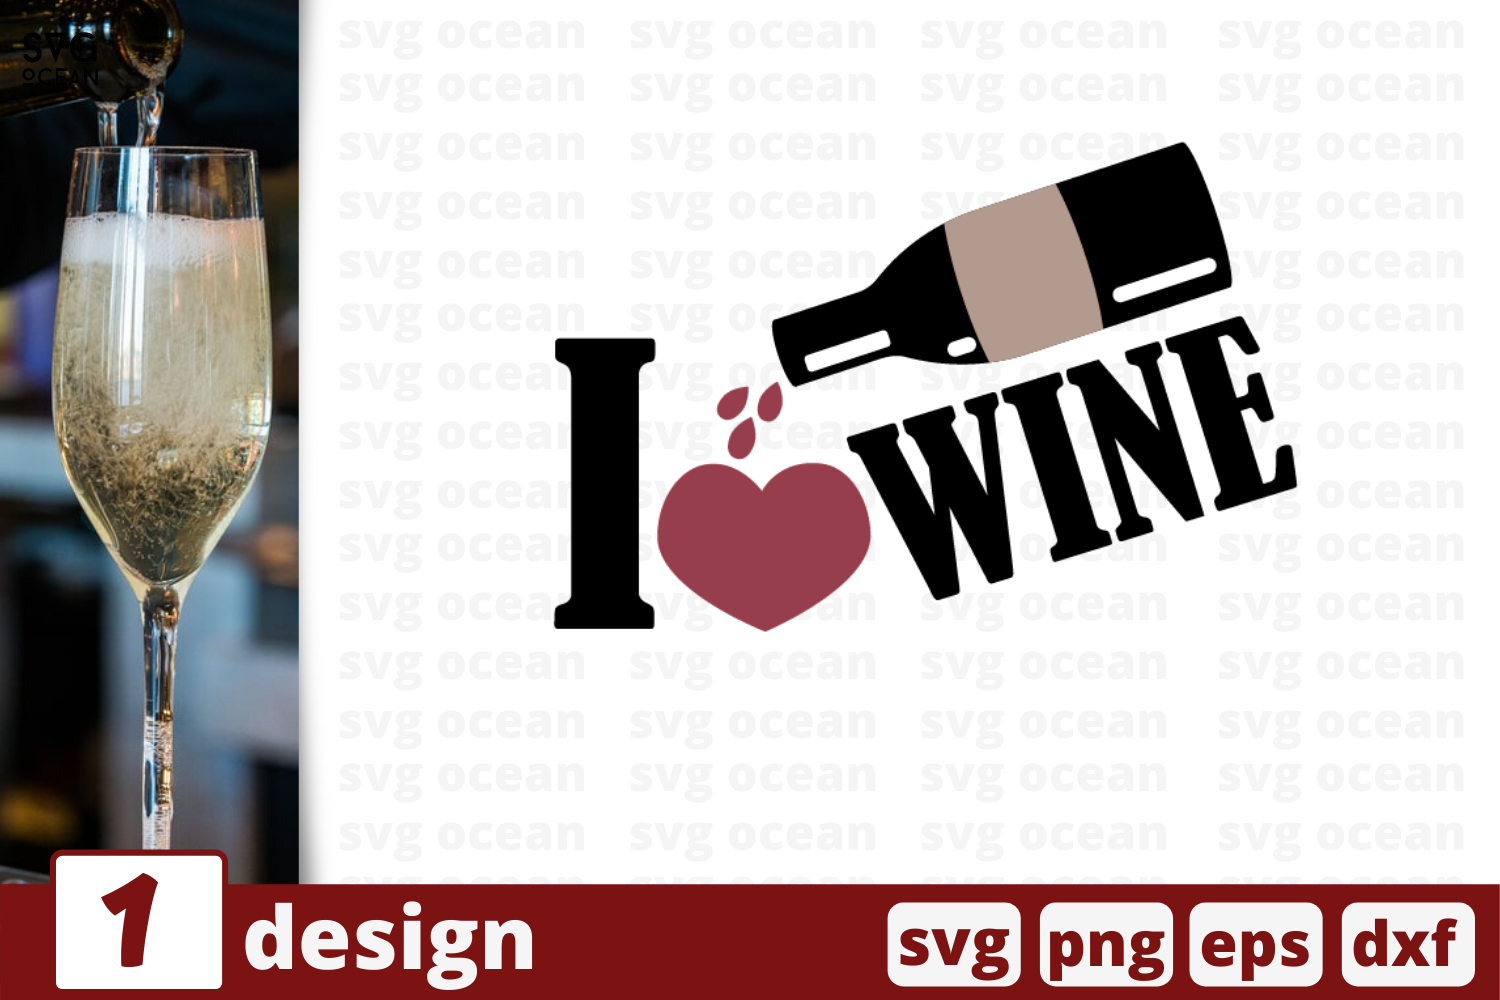 Download Love Wine Svg File Wine Sayings Wine Quotes Svg Files For Cricut Instant Download Wine Shirt Wine Iron On Transfer N359 Clip Art Art Collectibles Delage Com Br